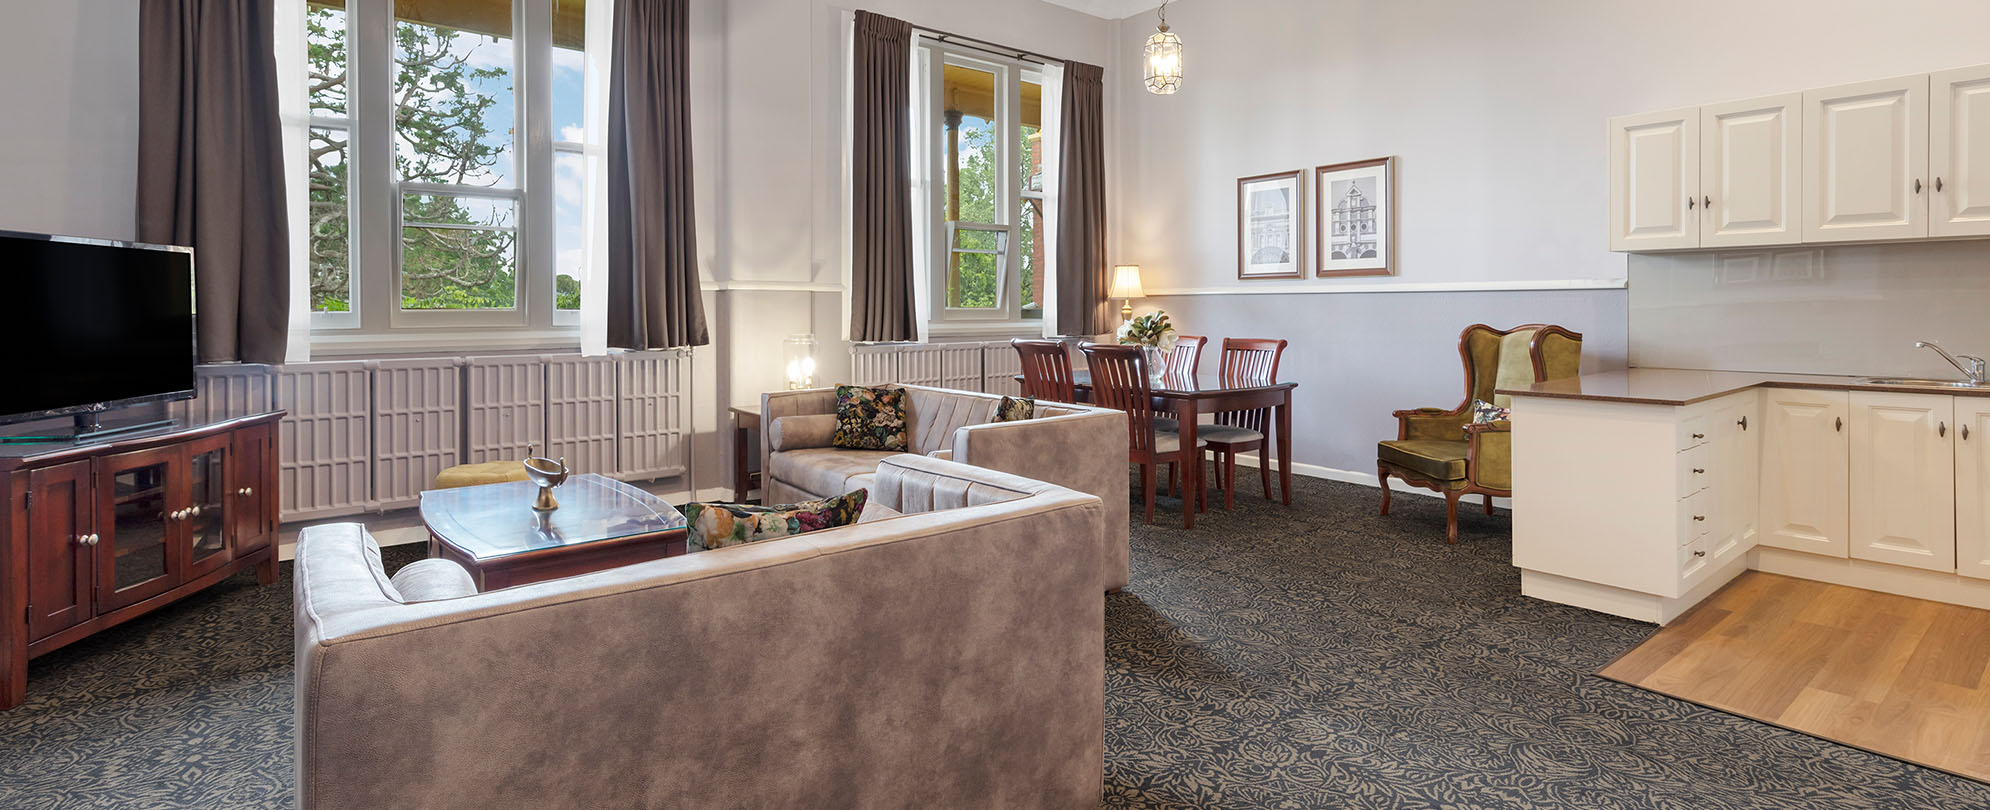 The living room, kitchen, and dining room inside a deluxe suite at Club Wyndham Ballarat